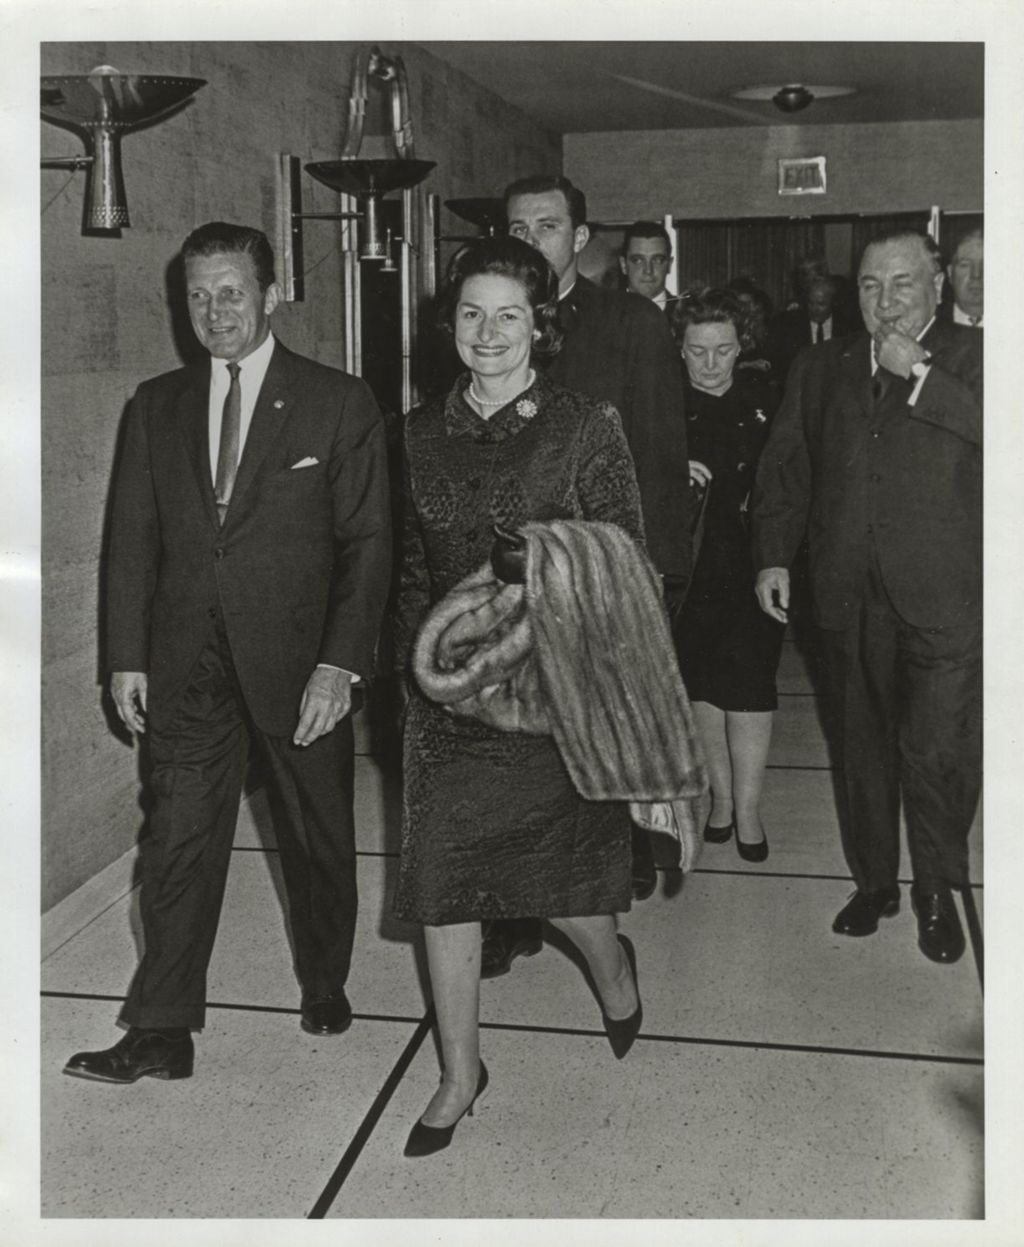 Otto Kerner, Lady Bird Johnson, Richard J. Daley, Eleanor Daley and others at the Conrad Hilton Hotel